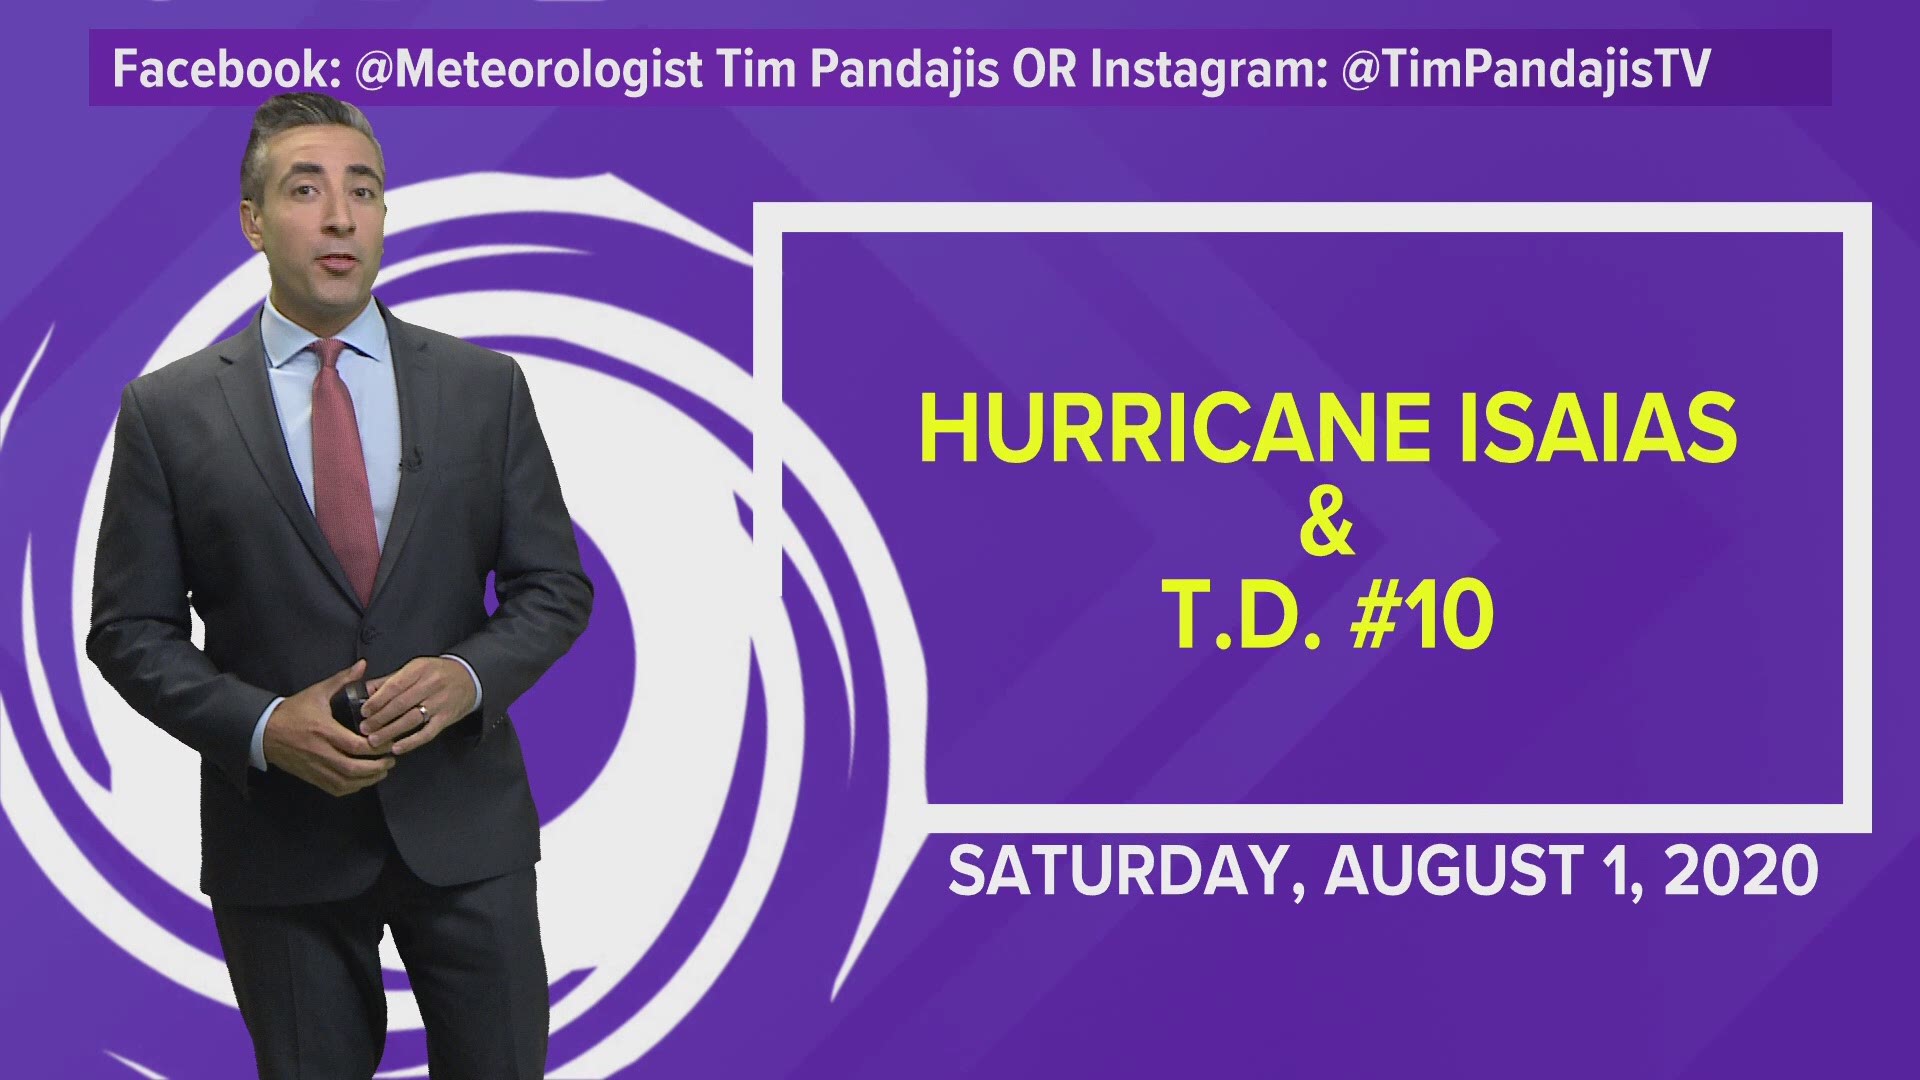 13News Now meteorologist Tim Pandajis gives an update Hurricane Isaias as it moves through the Bahamas and heads toward the Florida coast.